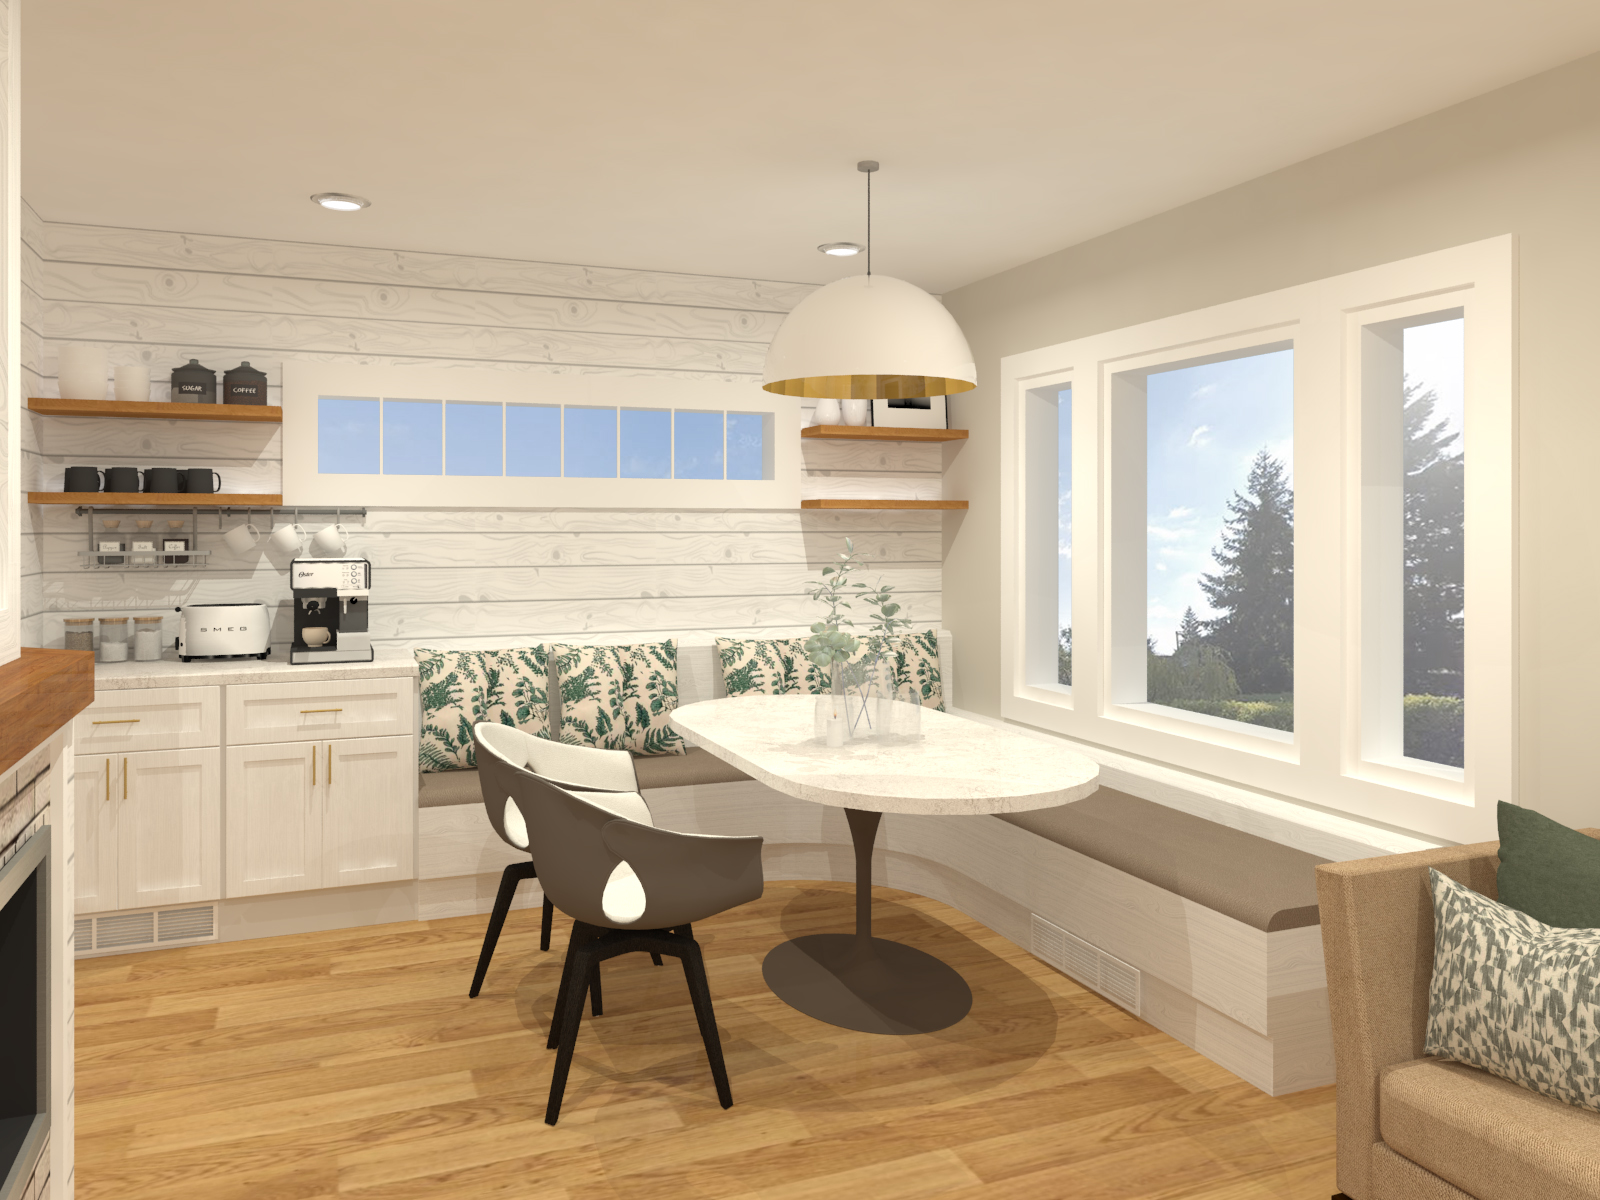 A remodel kitchen with a breakfast island.